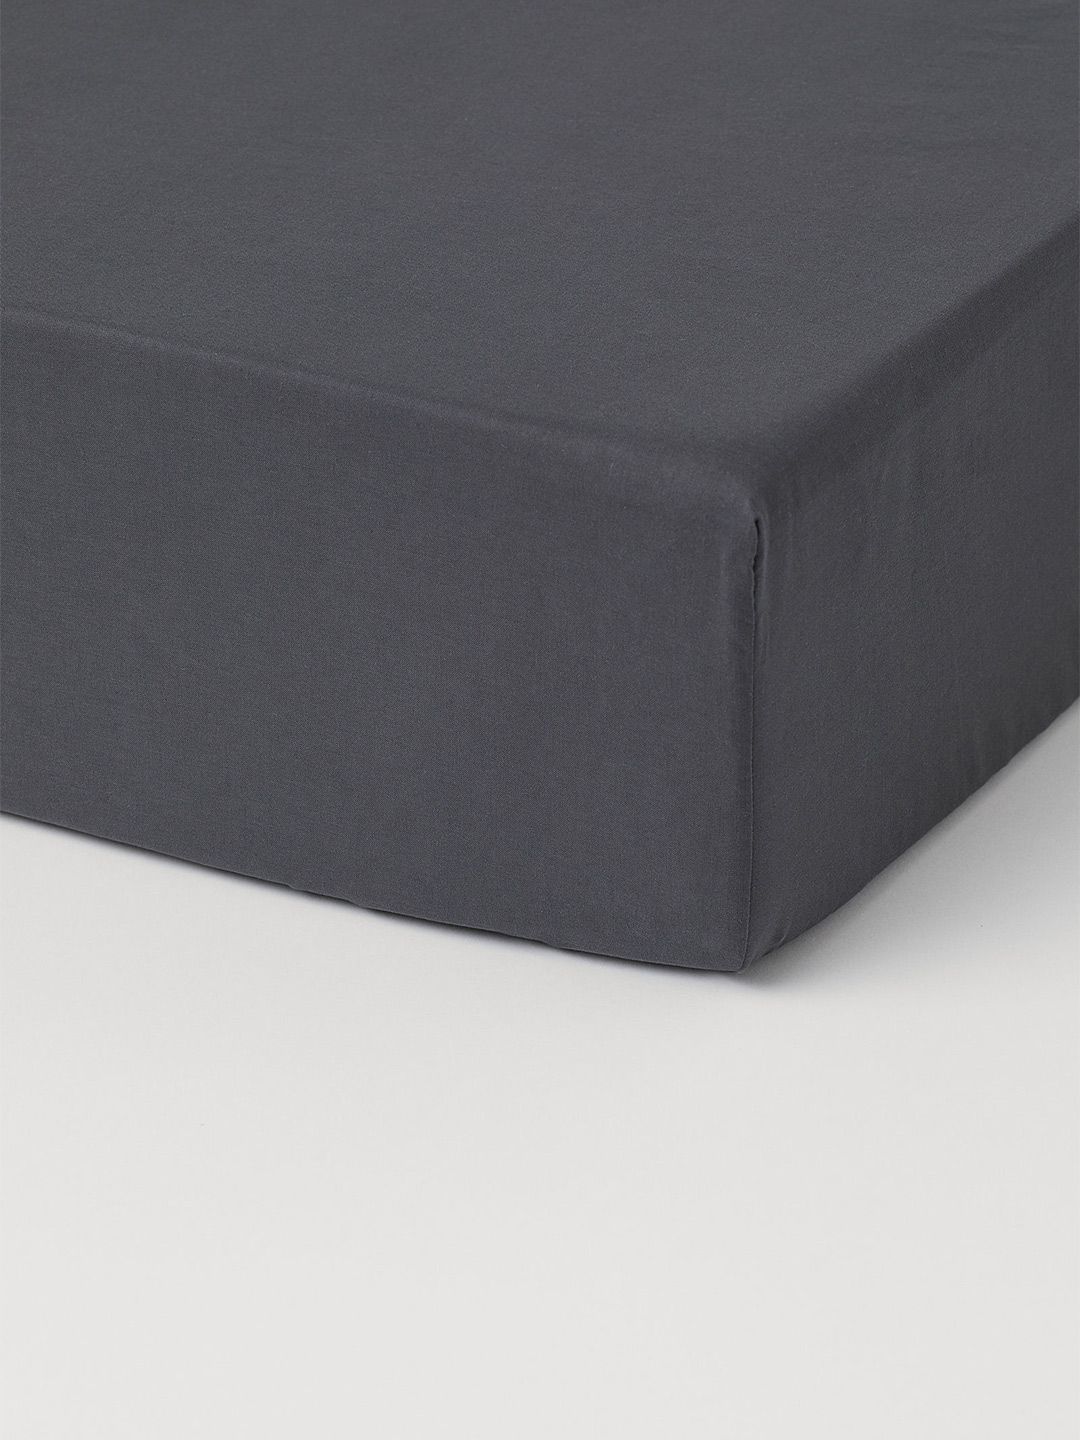 H&M Charcoal Grey Fitted Cotton Sheet Price in India